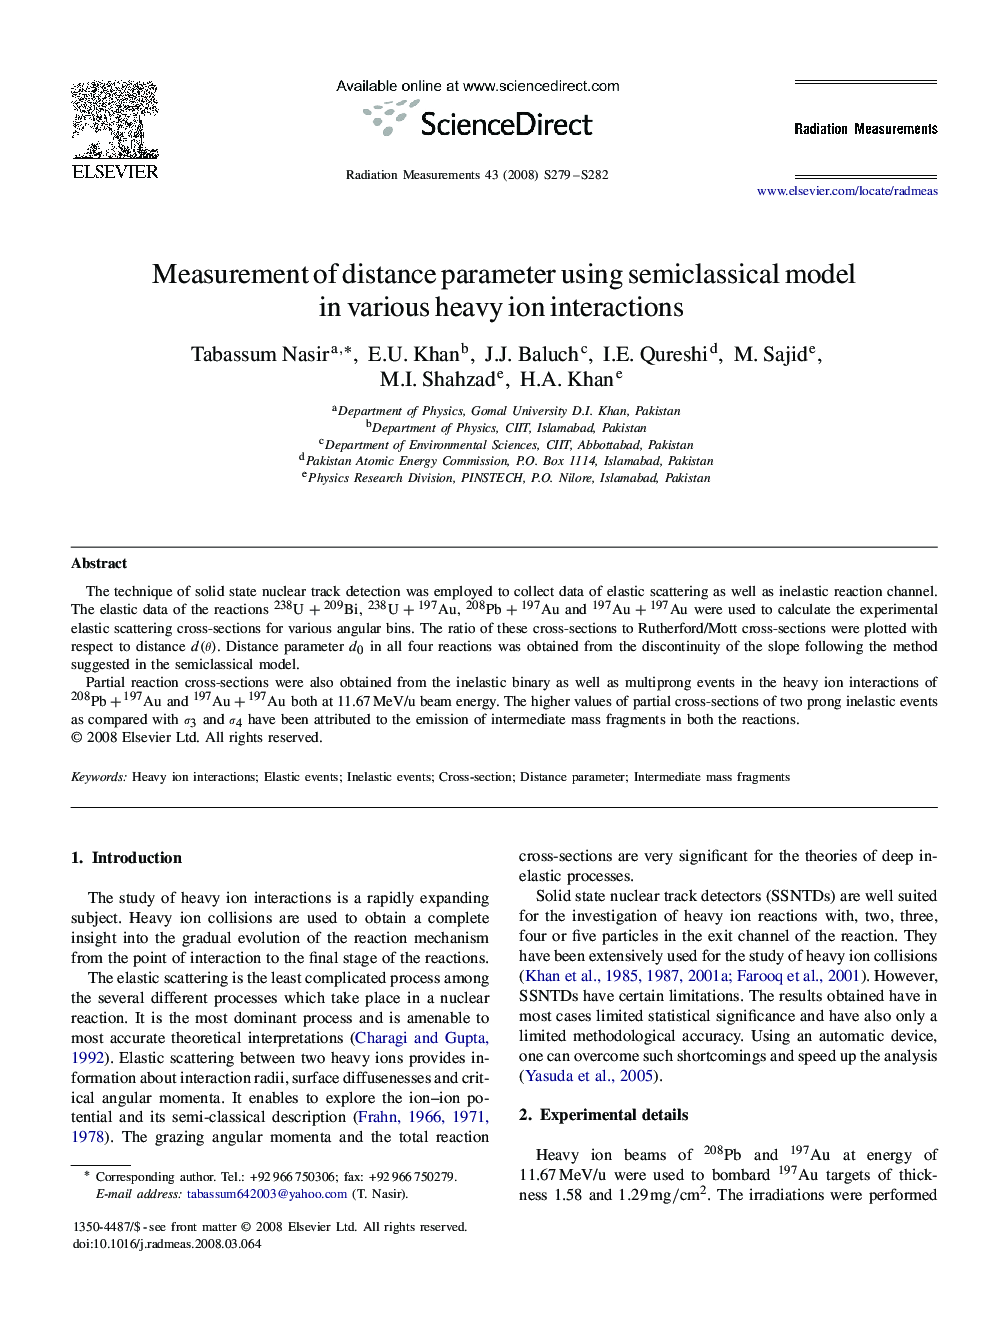 Measurement of distance parameter using semiclassical model in various heavy ion interactions